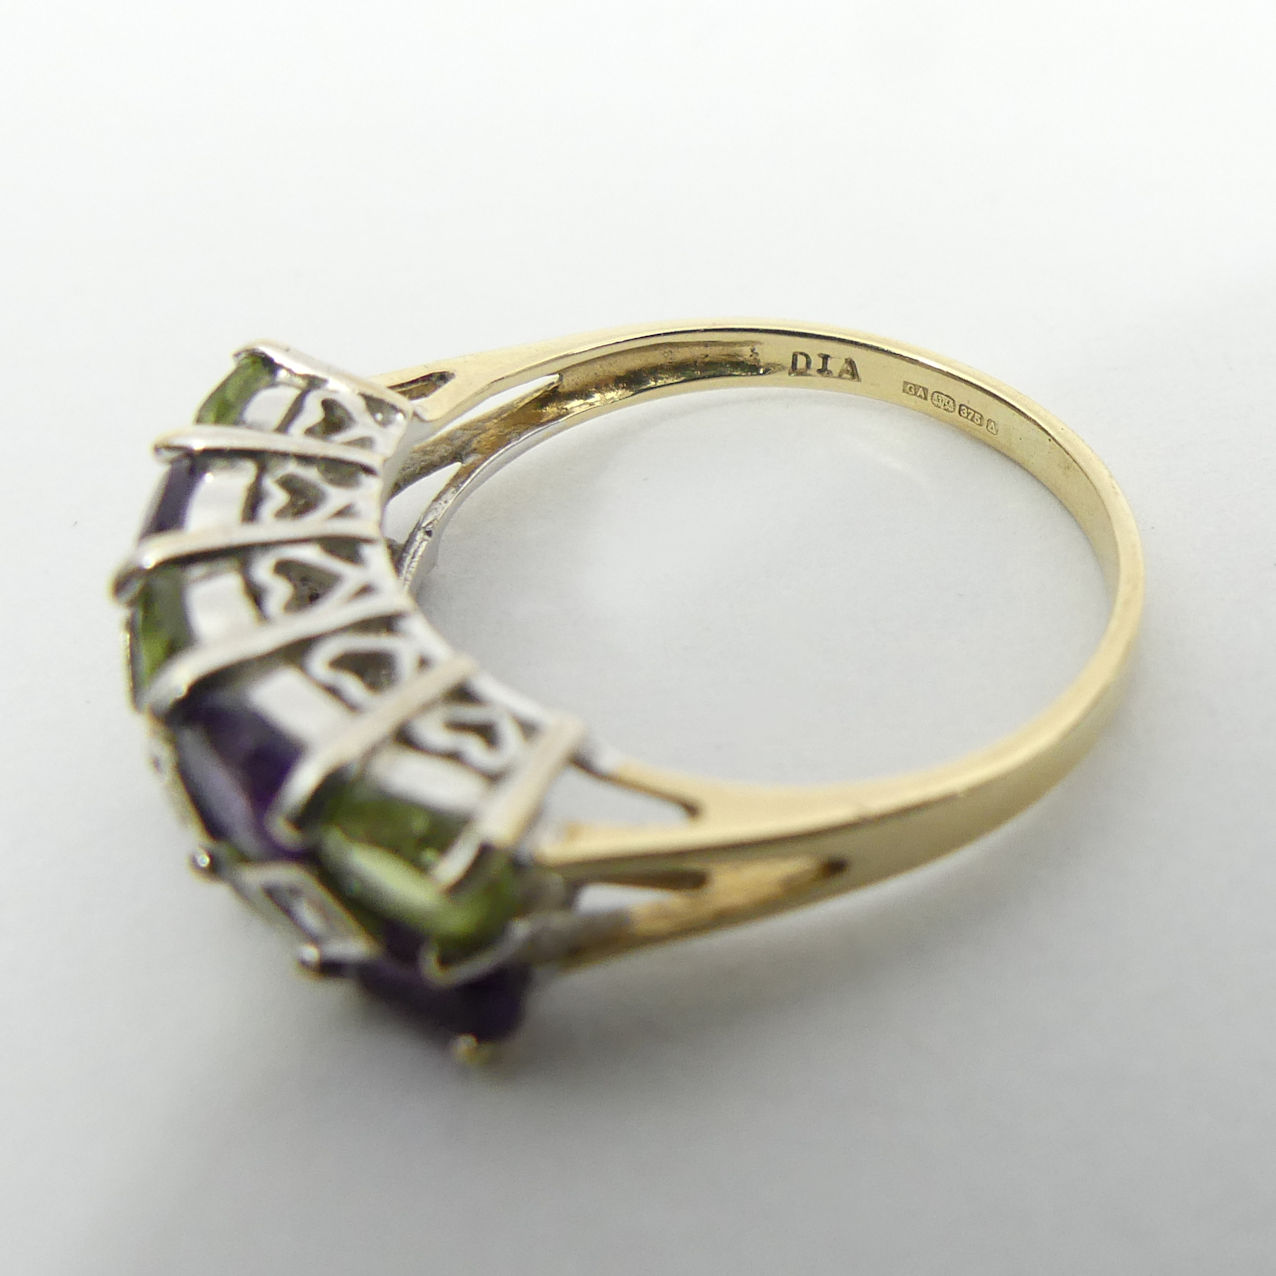 9ct gold peridot, amethyst and diamond ring, 2.4 grams, 6.6mm, size M 1/2. UK Postage £12. - Image 6 of 6